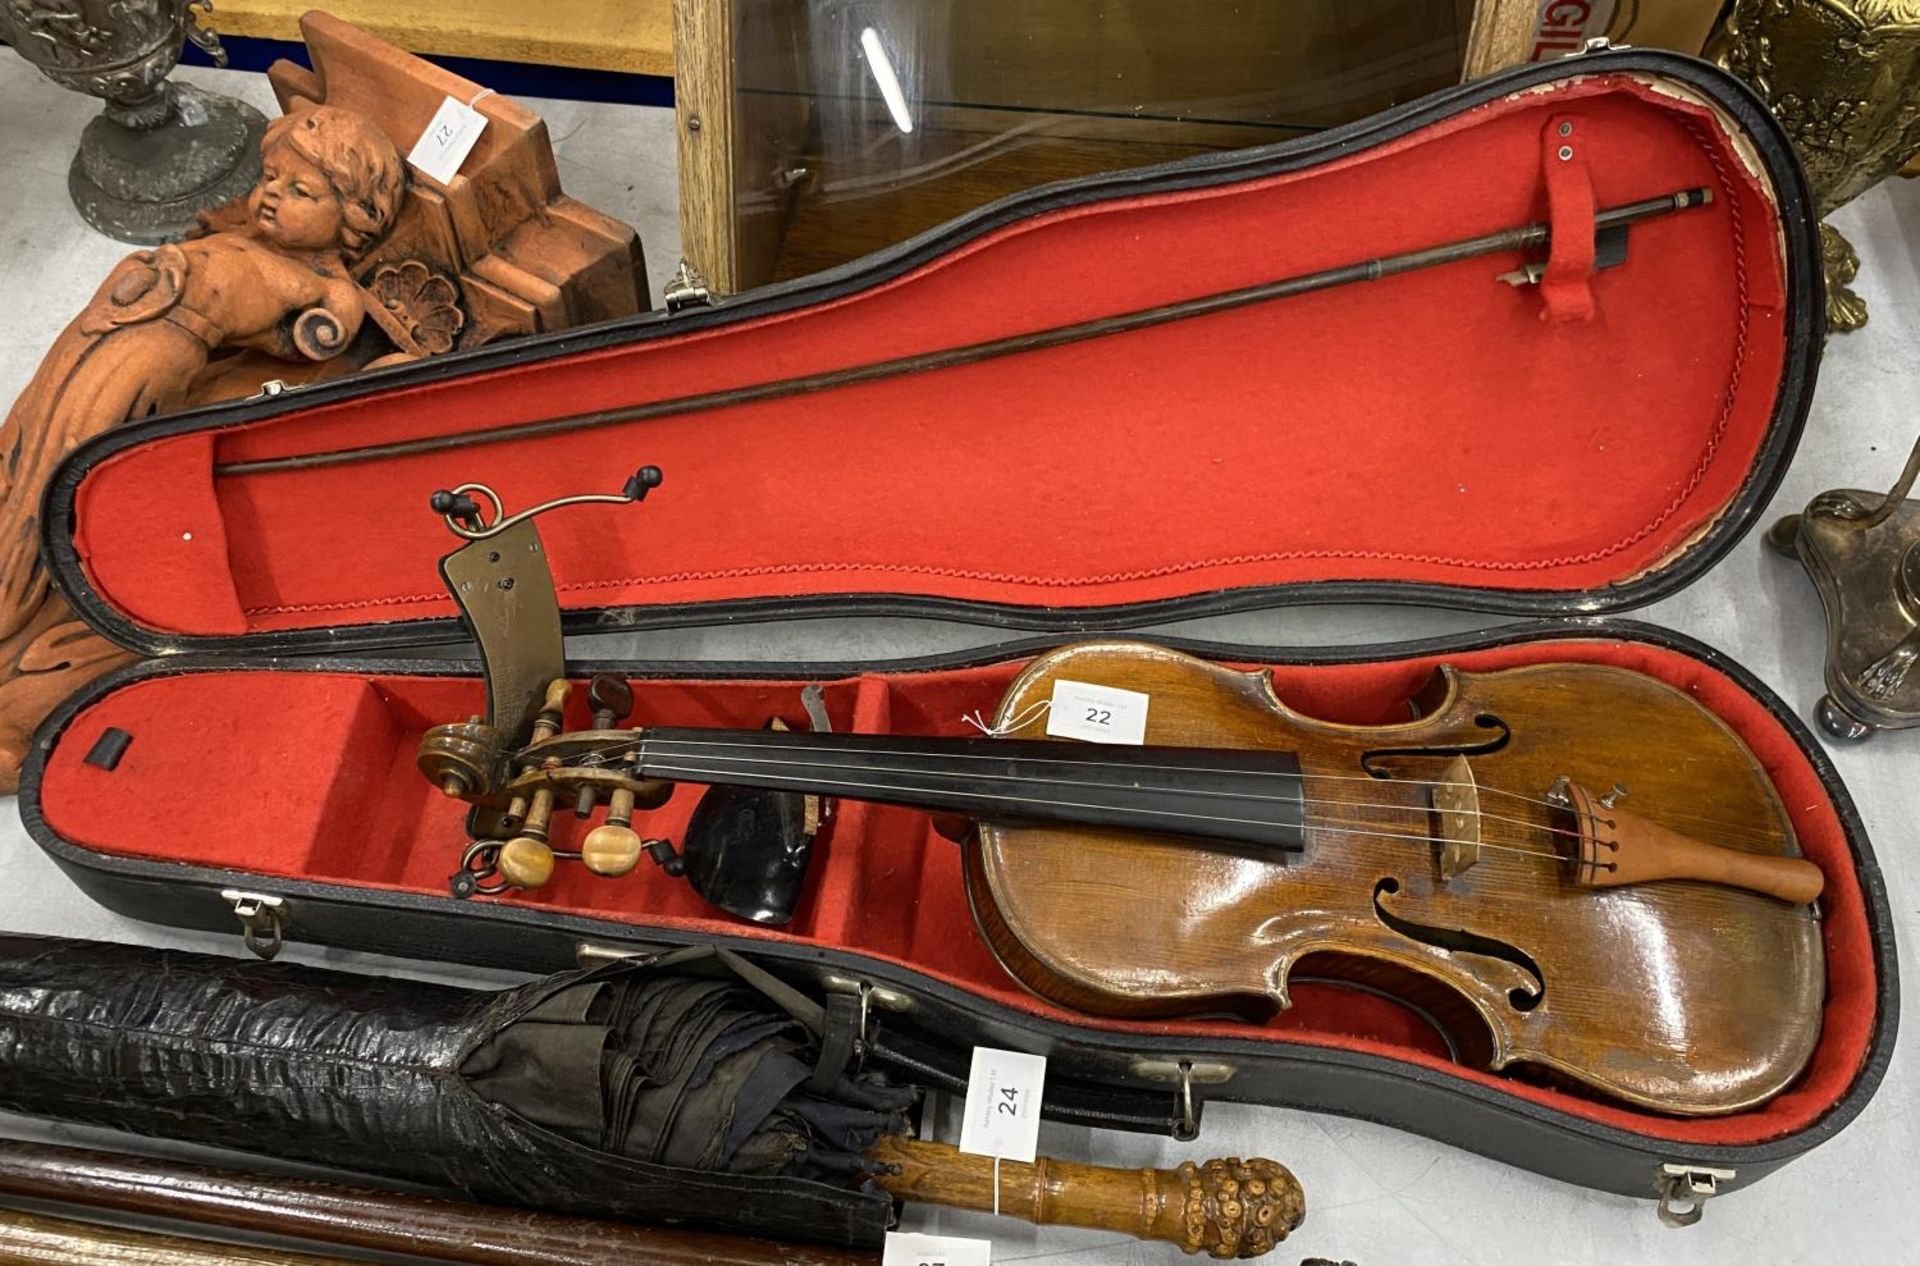 A 19TH CENTURY CASED VIOLIN WITH PAPER LABEL TO INTERIOR - 'JOANNES GEORGIUS' (DATE DIFFICULT TO